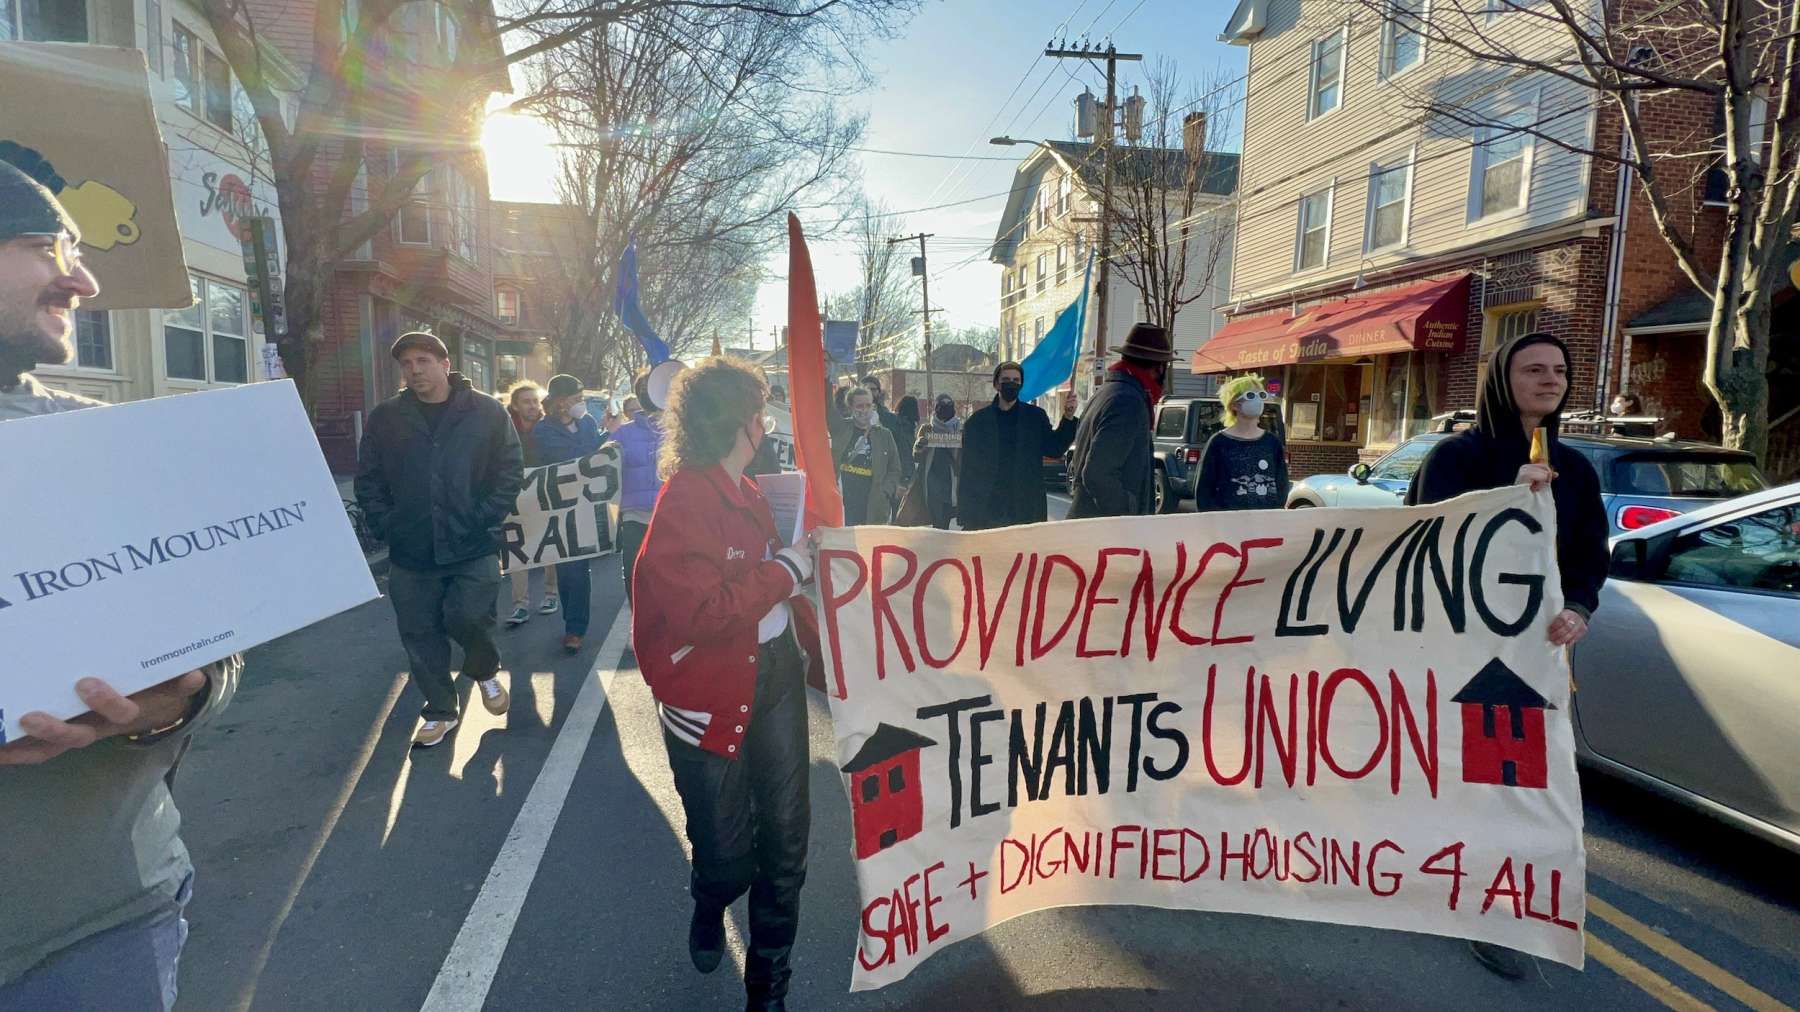 Mushrooms sprouting from the ceiling: Providence Living Tenants Union protests their unhealthy apartments